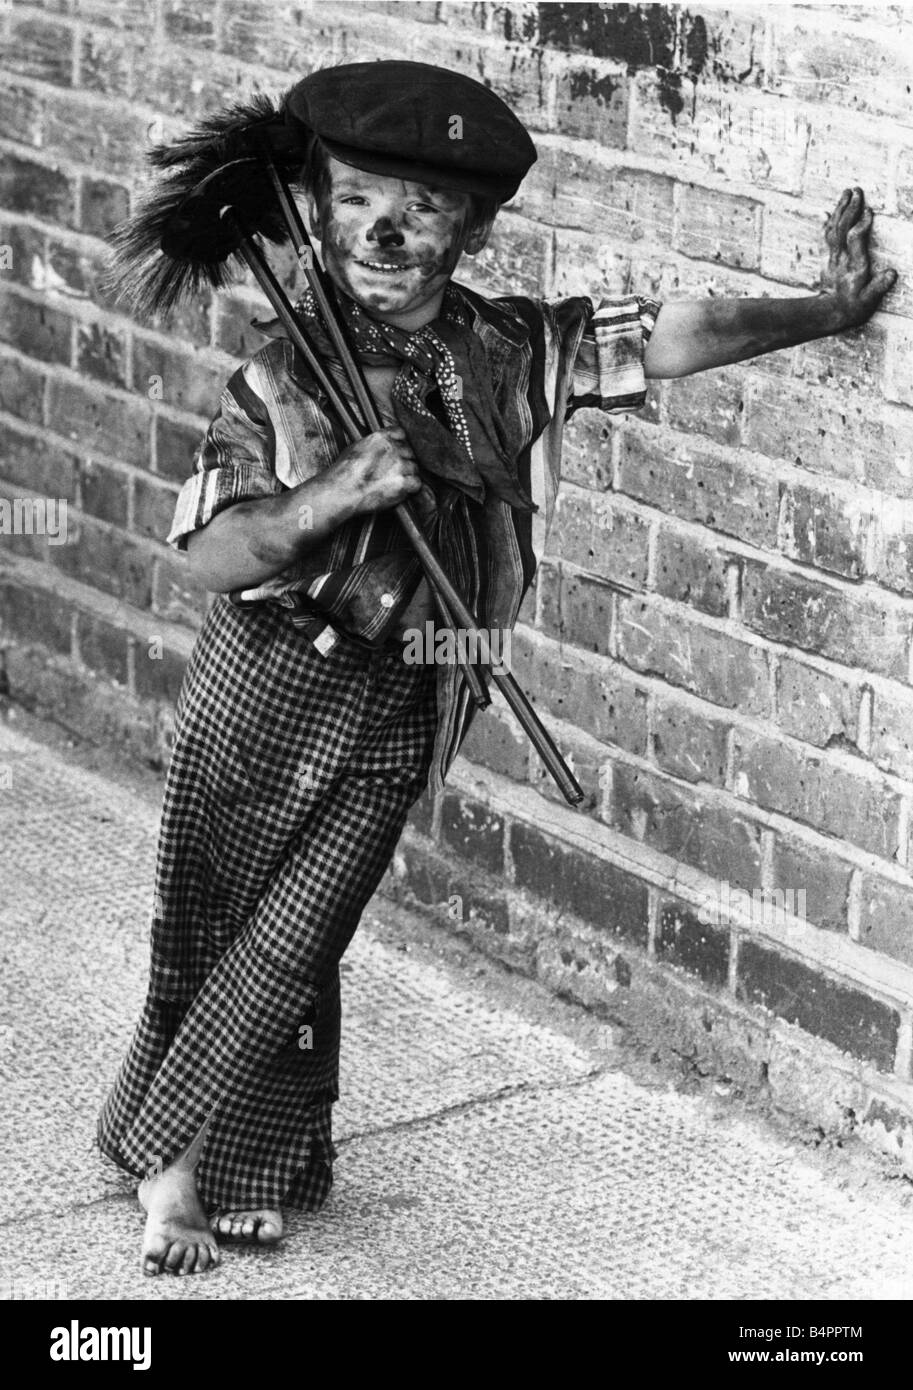 http://c8.alamy.com/comp/B4PPTM/four-year-old-chimney-sweep-tommy-stafford-in-fancy-dress-to-celebrate-B4PPTM.jpg